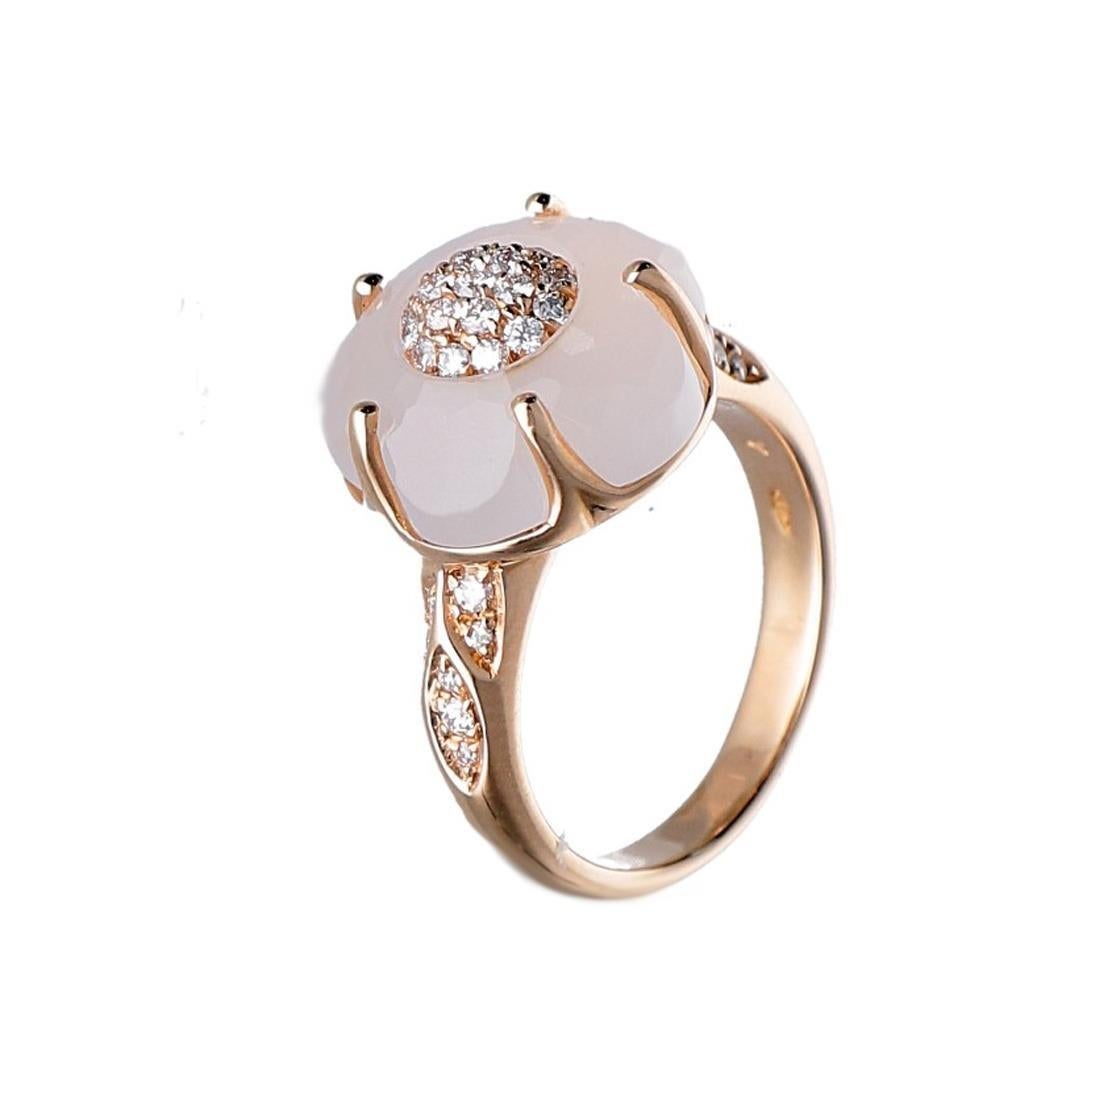 This Pasquale Bruni Bon Ton diamond ring is set in 18k pink gold. The Pasquale Bruni iconic flower consists of a five-petal domed faceted milky quartz of 16.46ct in a scalloped setting with pierced back. Centre has a domed setting with pave set